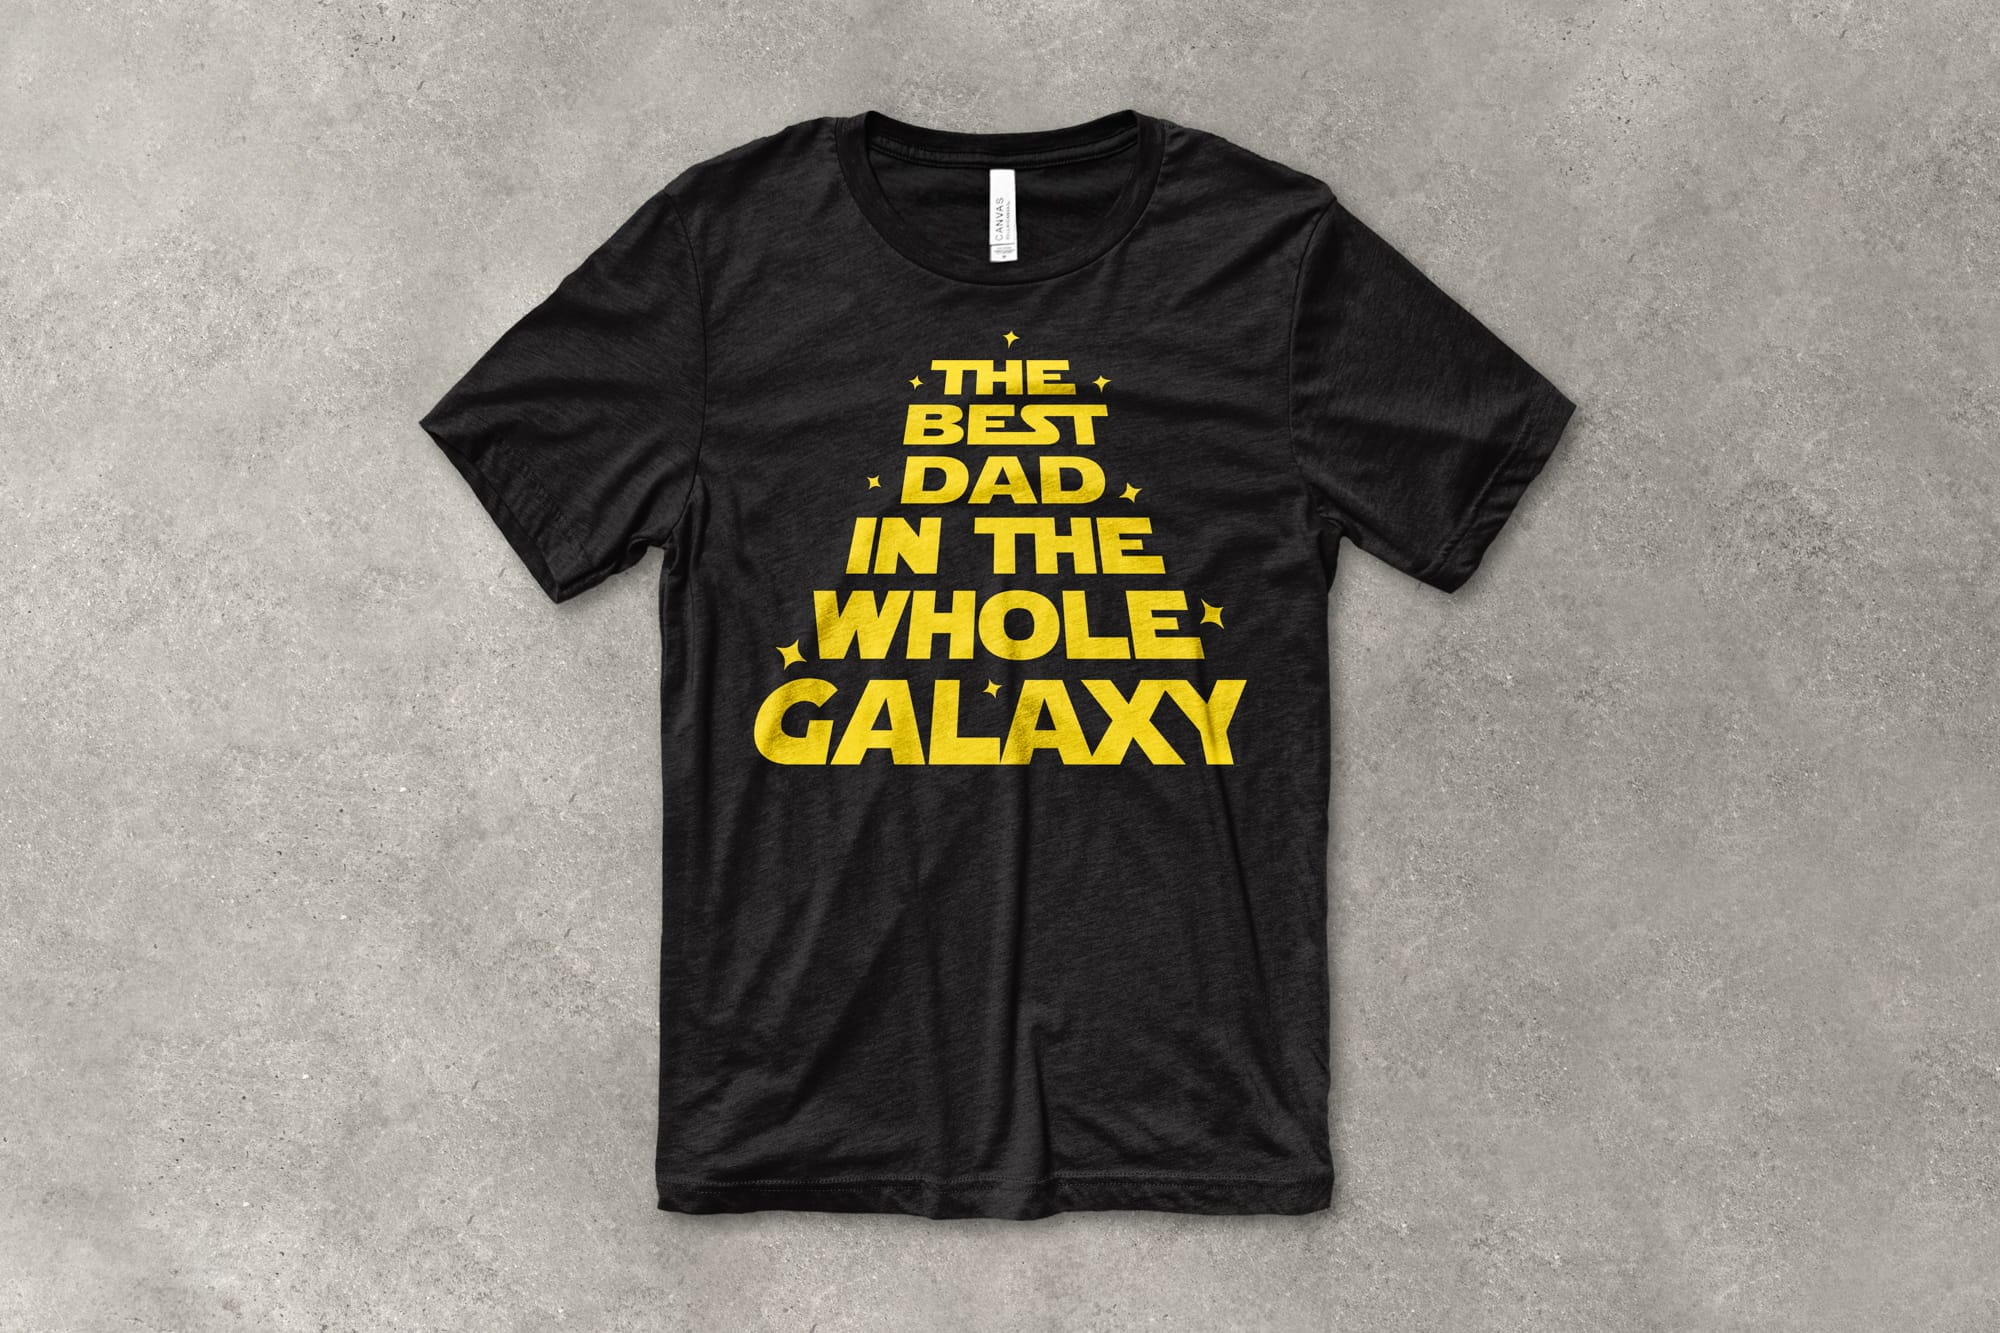 A flat t-shirt that has a customizable design that says "The best dad in the whole galaxy" in the style of Star Wars